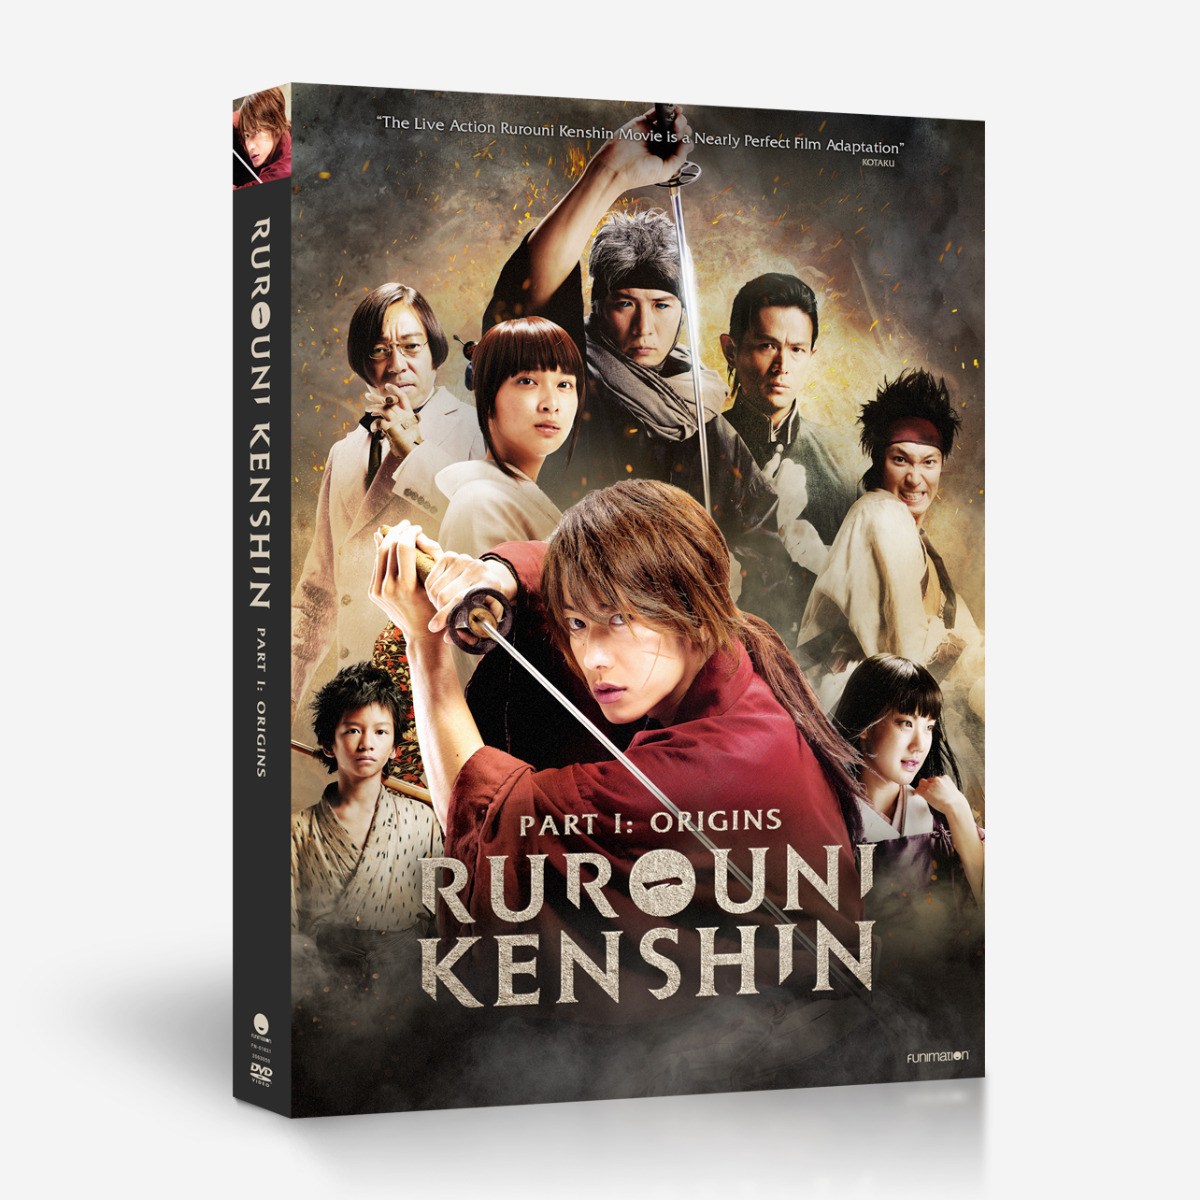 Rurouni Kenshin - The First Movie - DVD image count 0